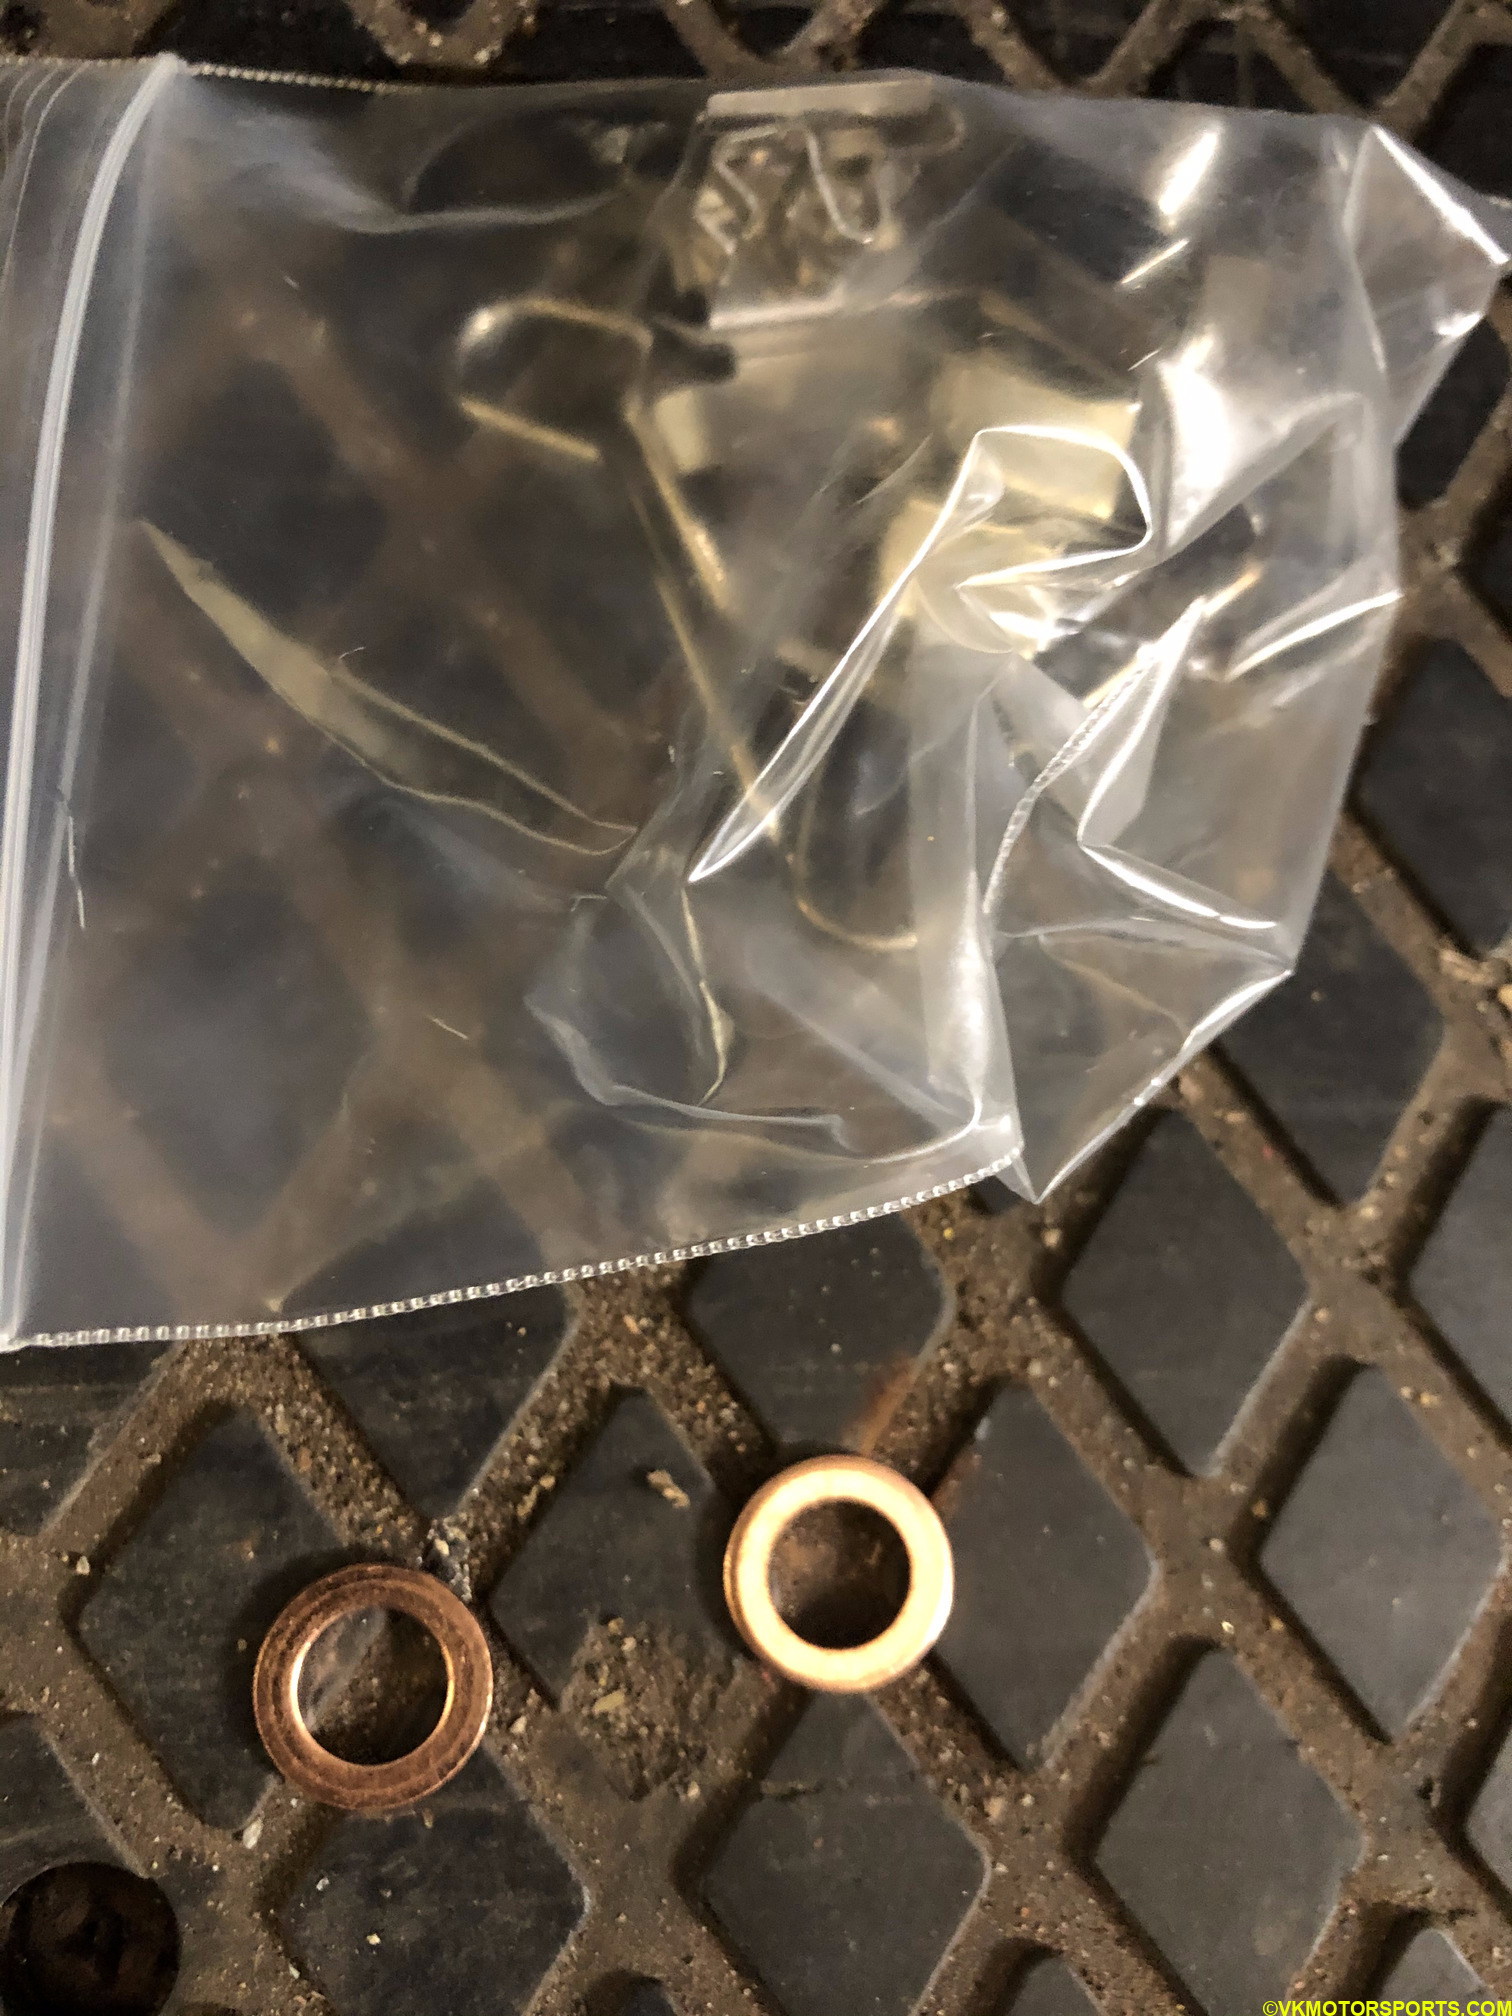 Washers in the parts package